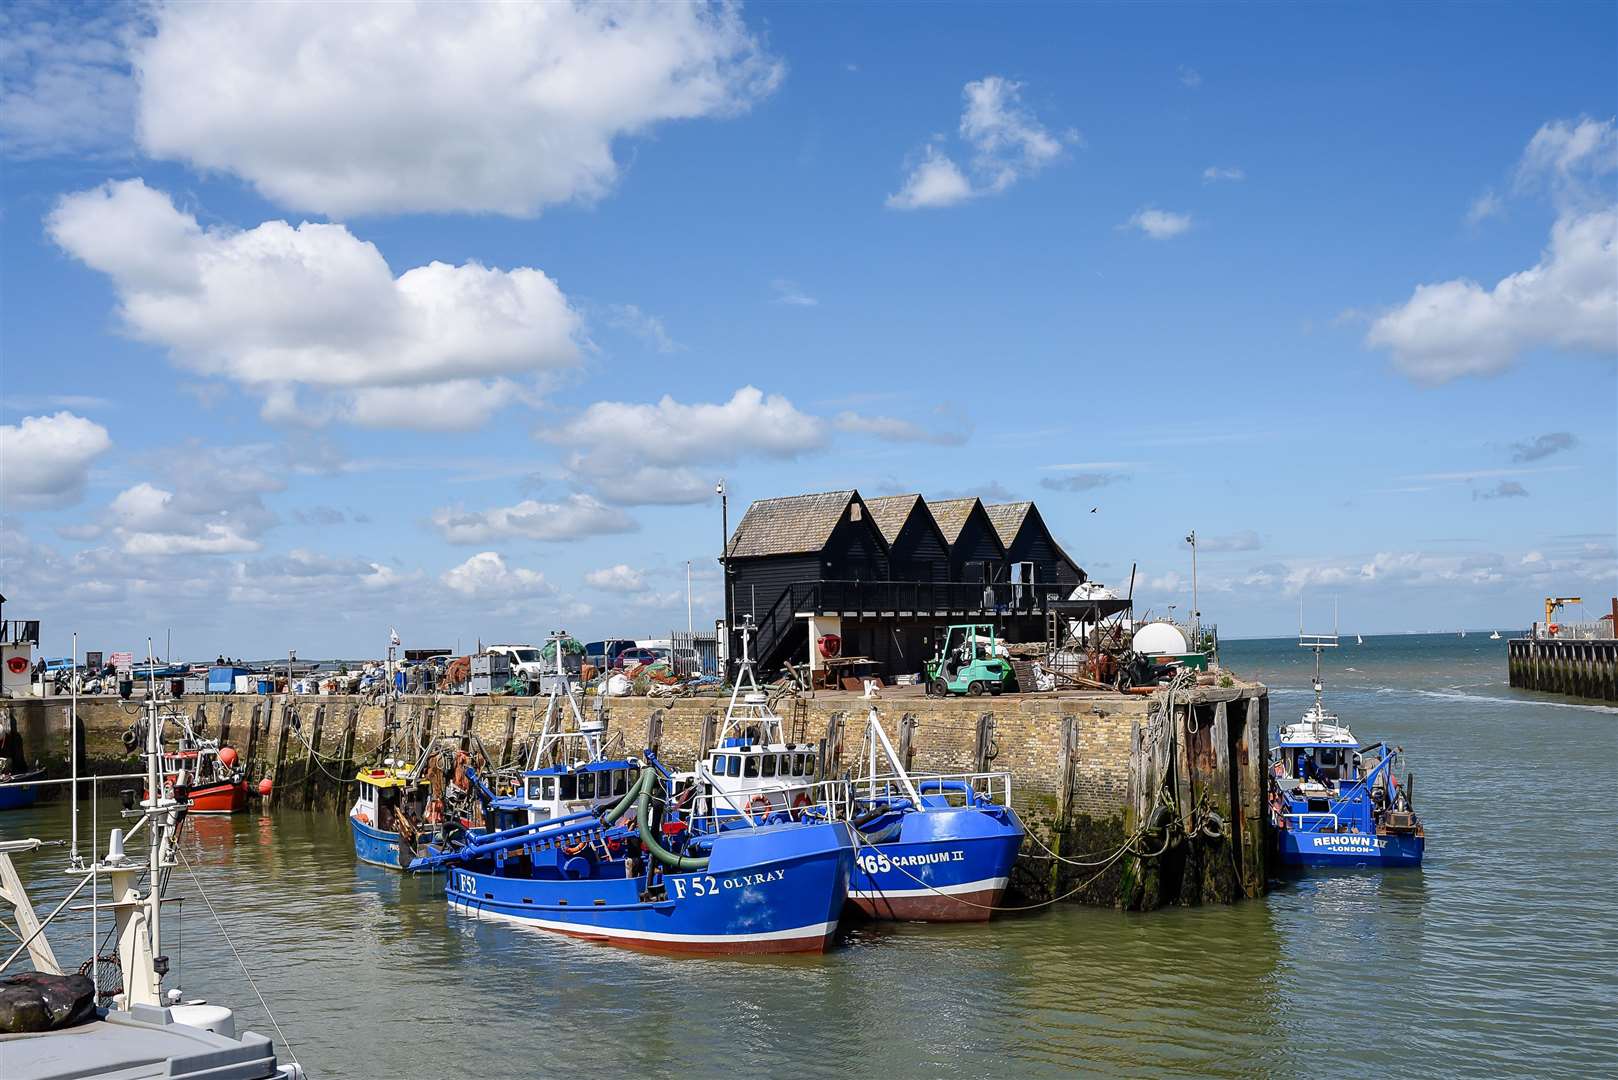 Fishermen across the UK have been affected by the ban